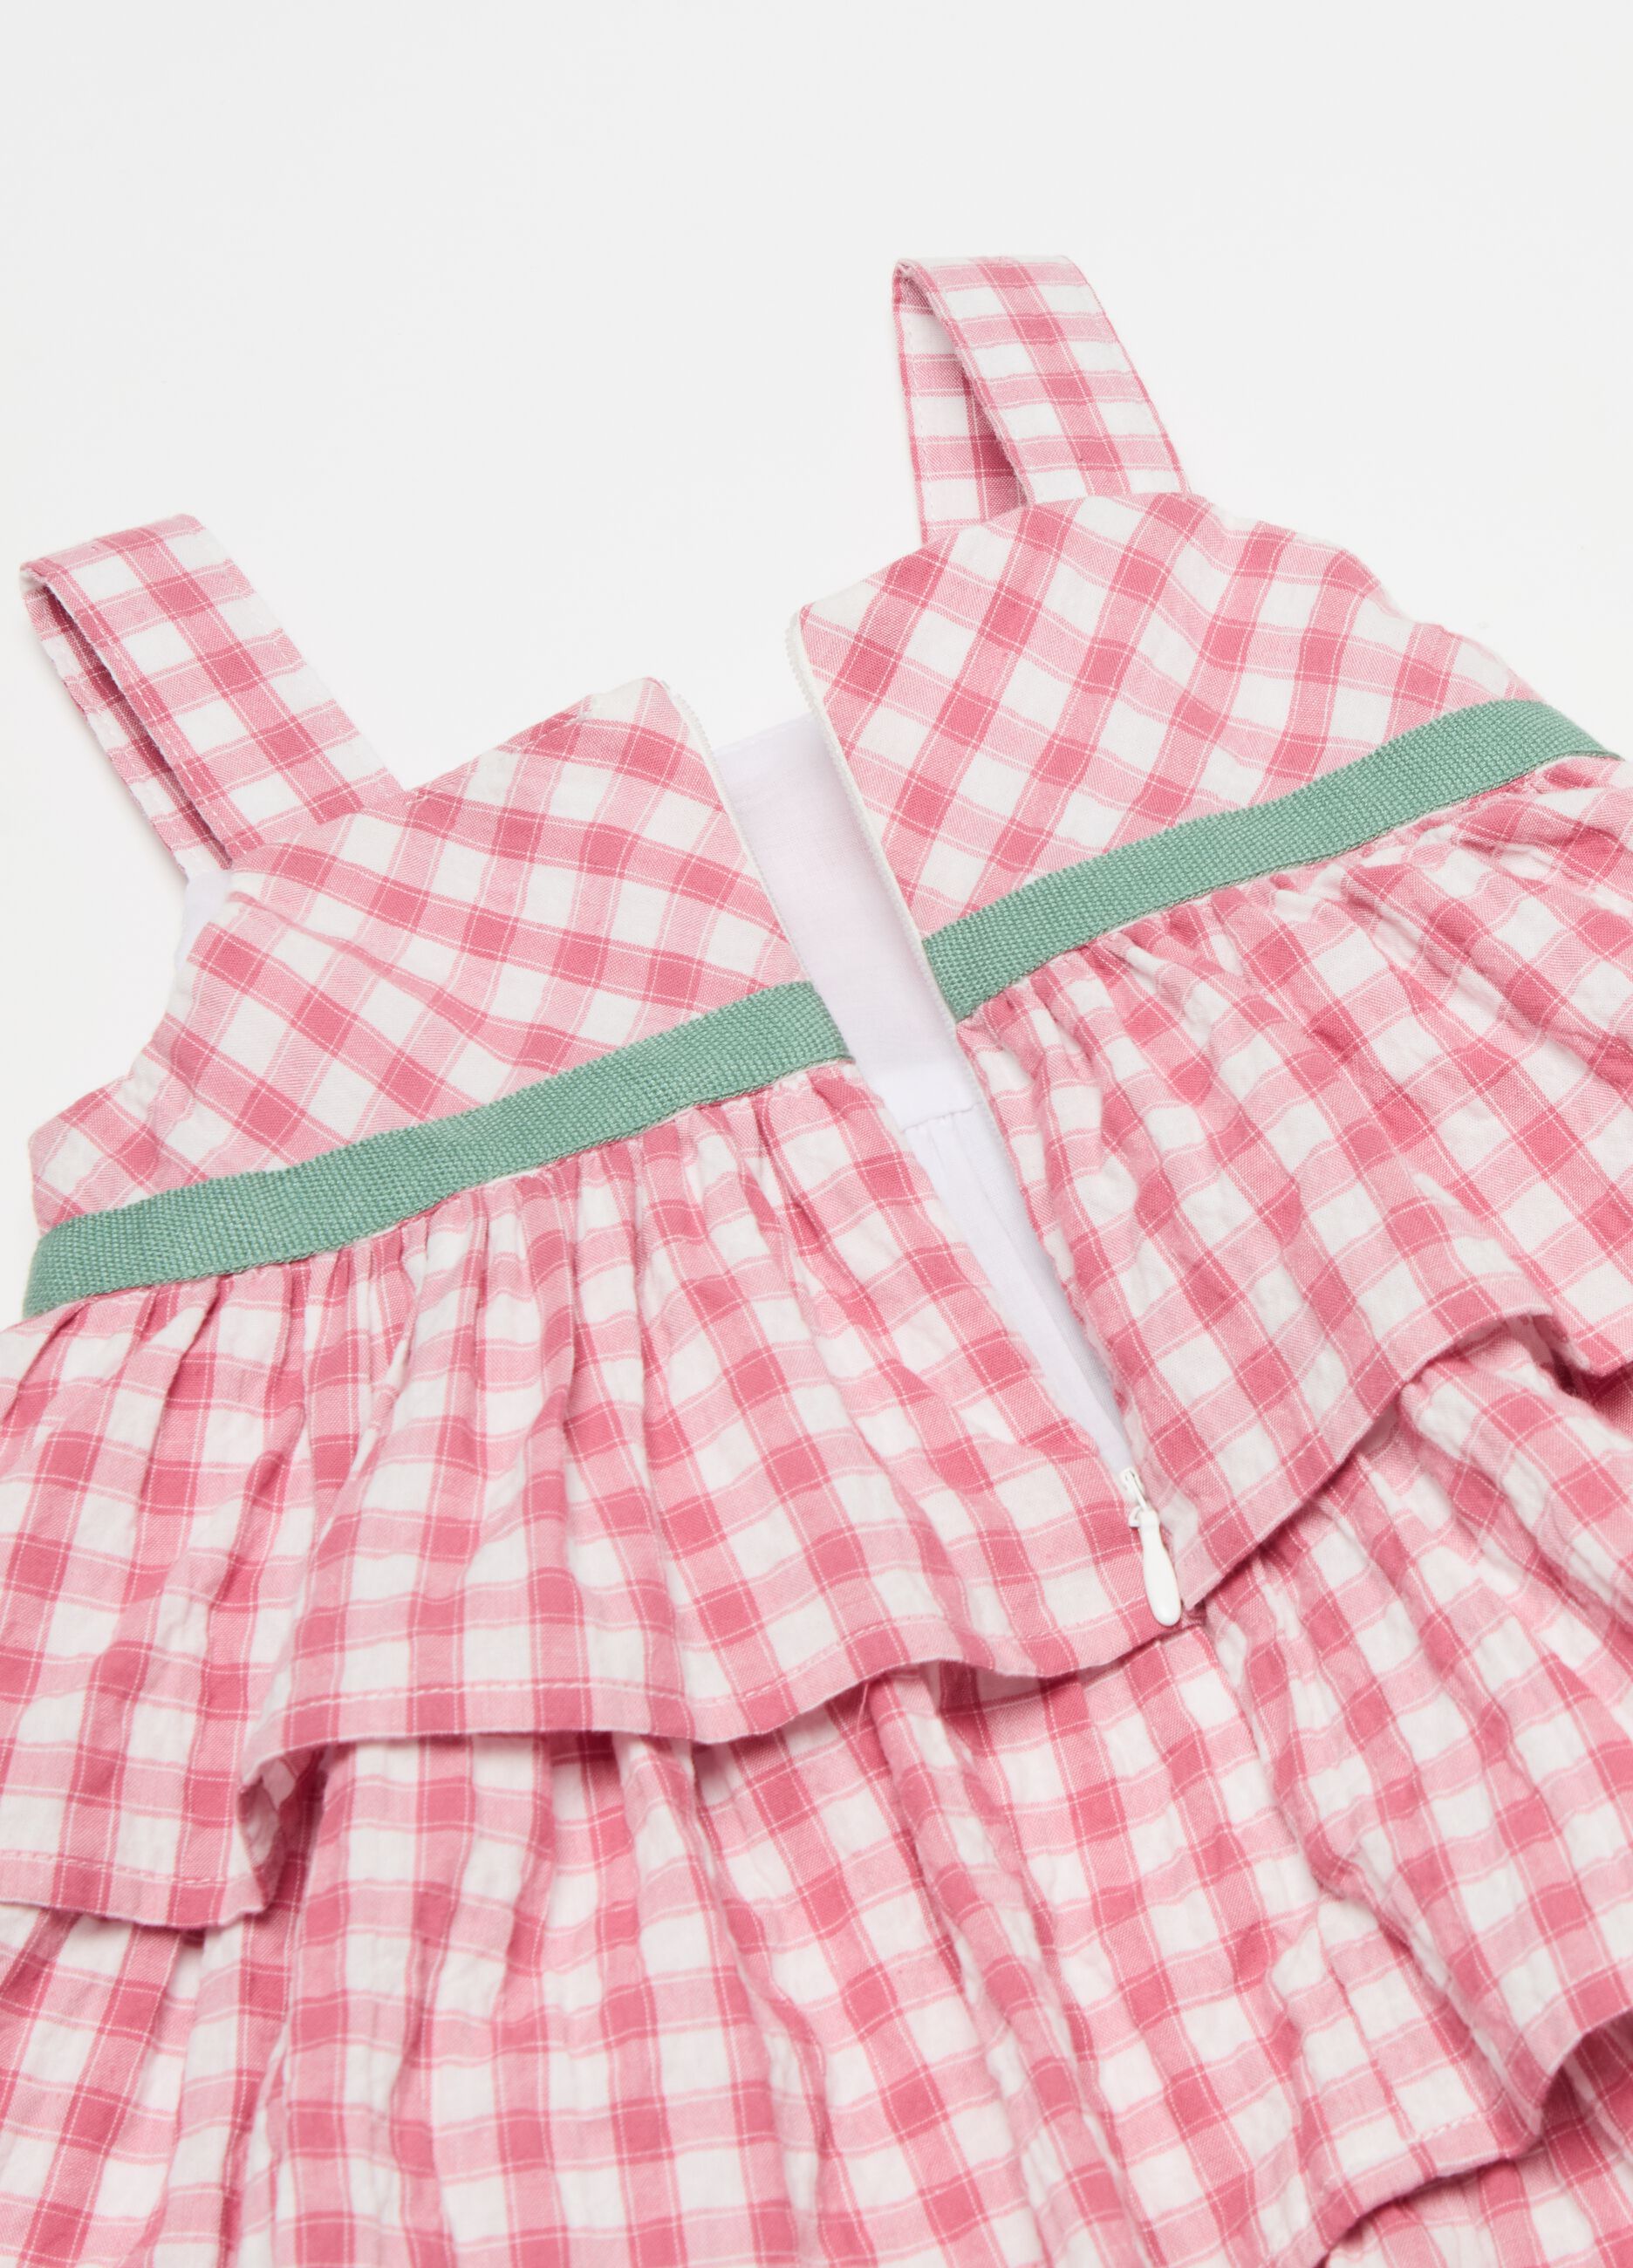 Tiered dress with check pattern